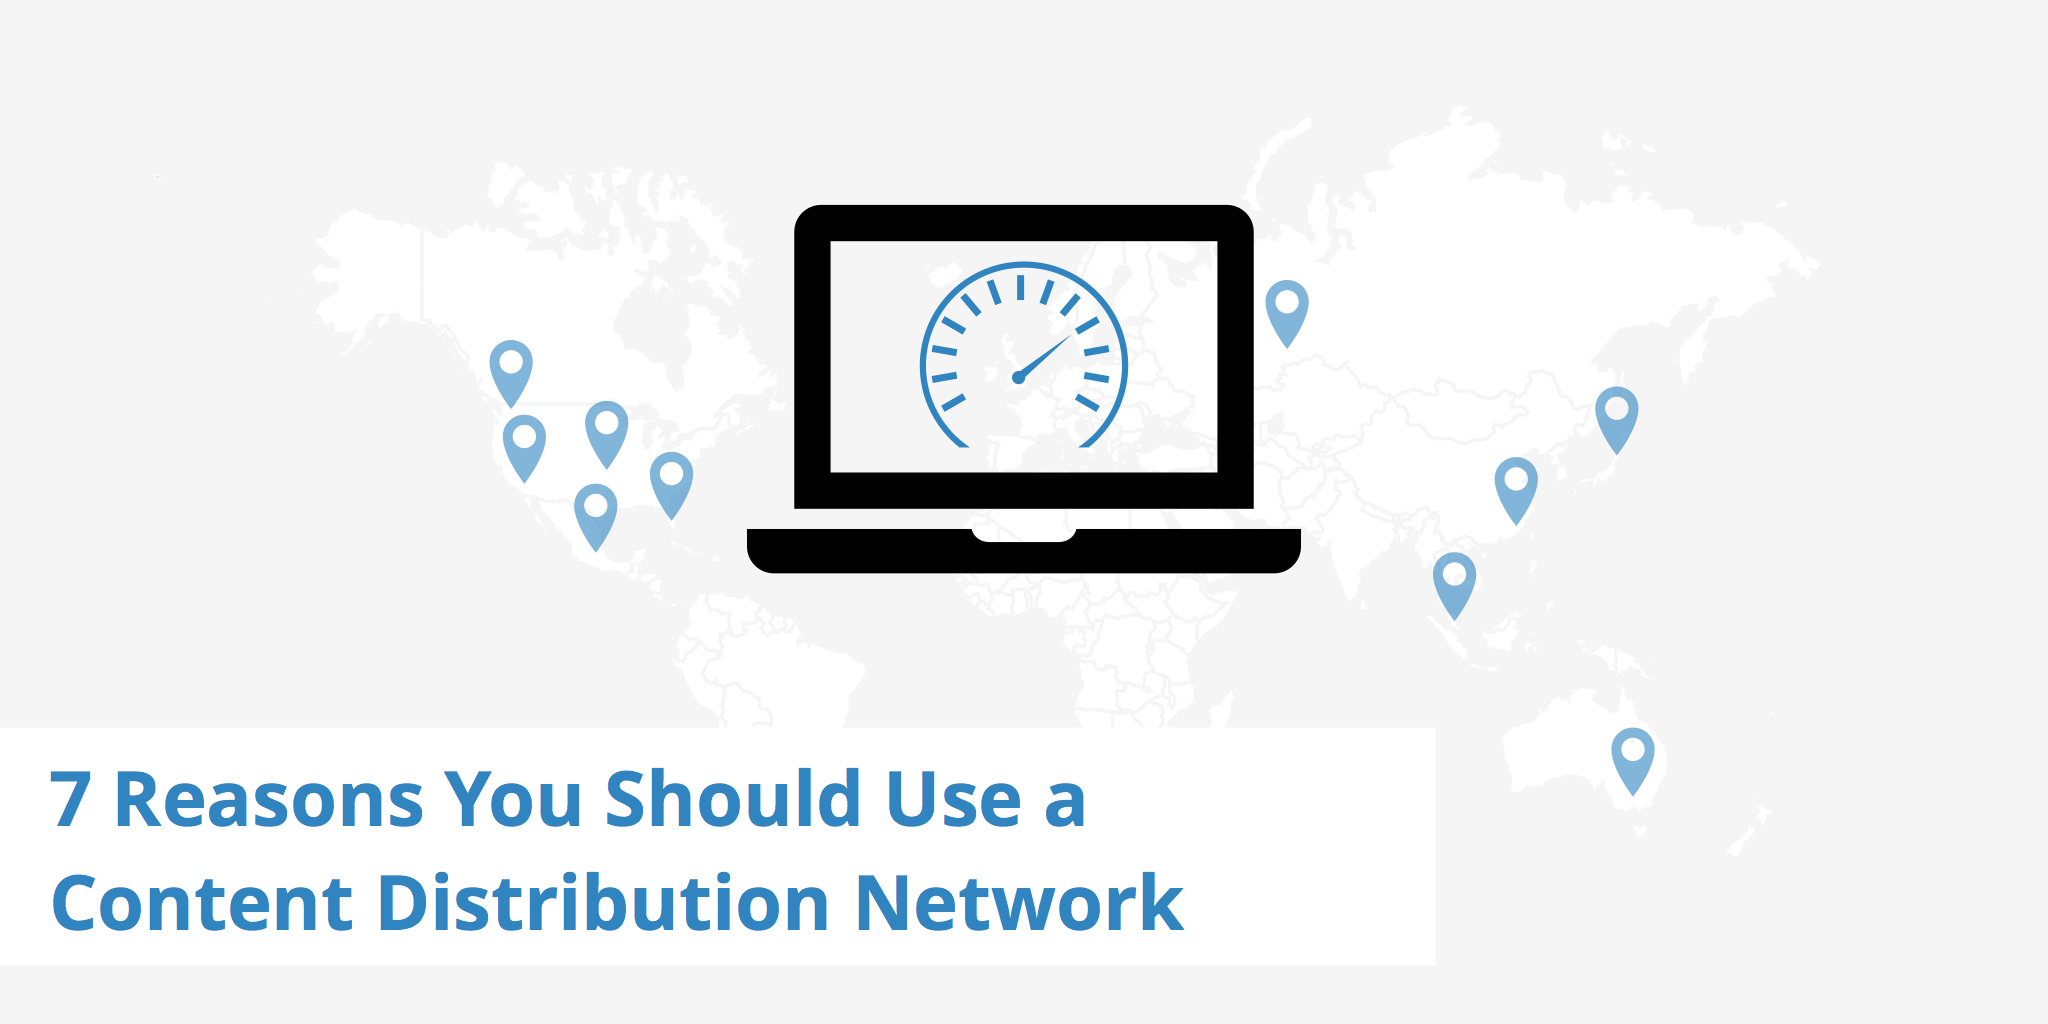 7 Reasons You Should Use a Content Distribution Network